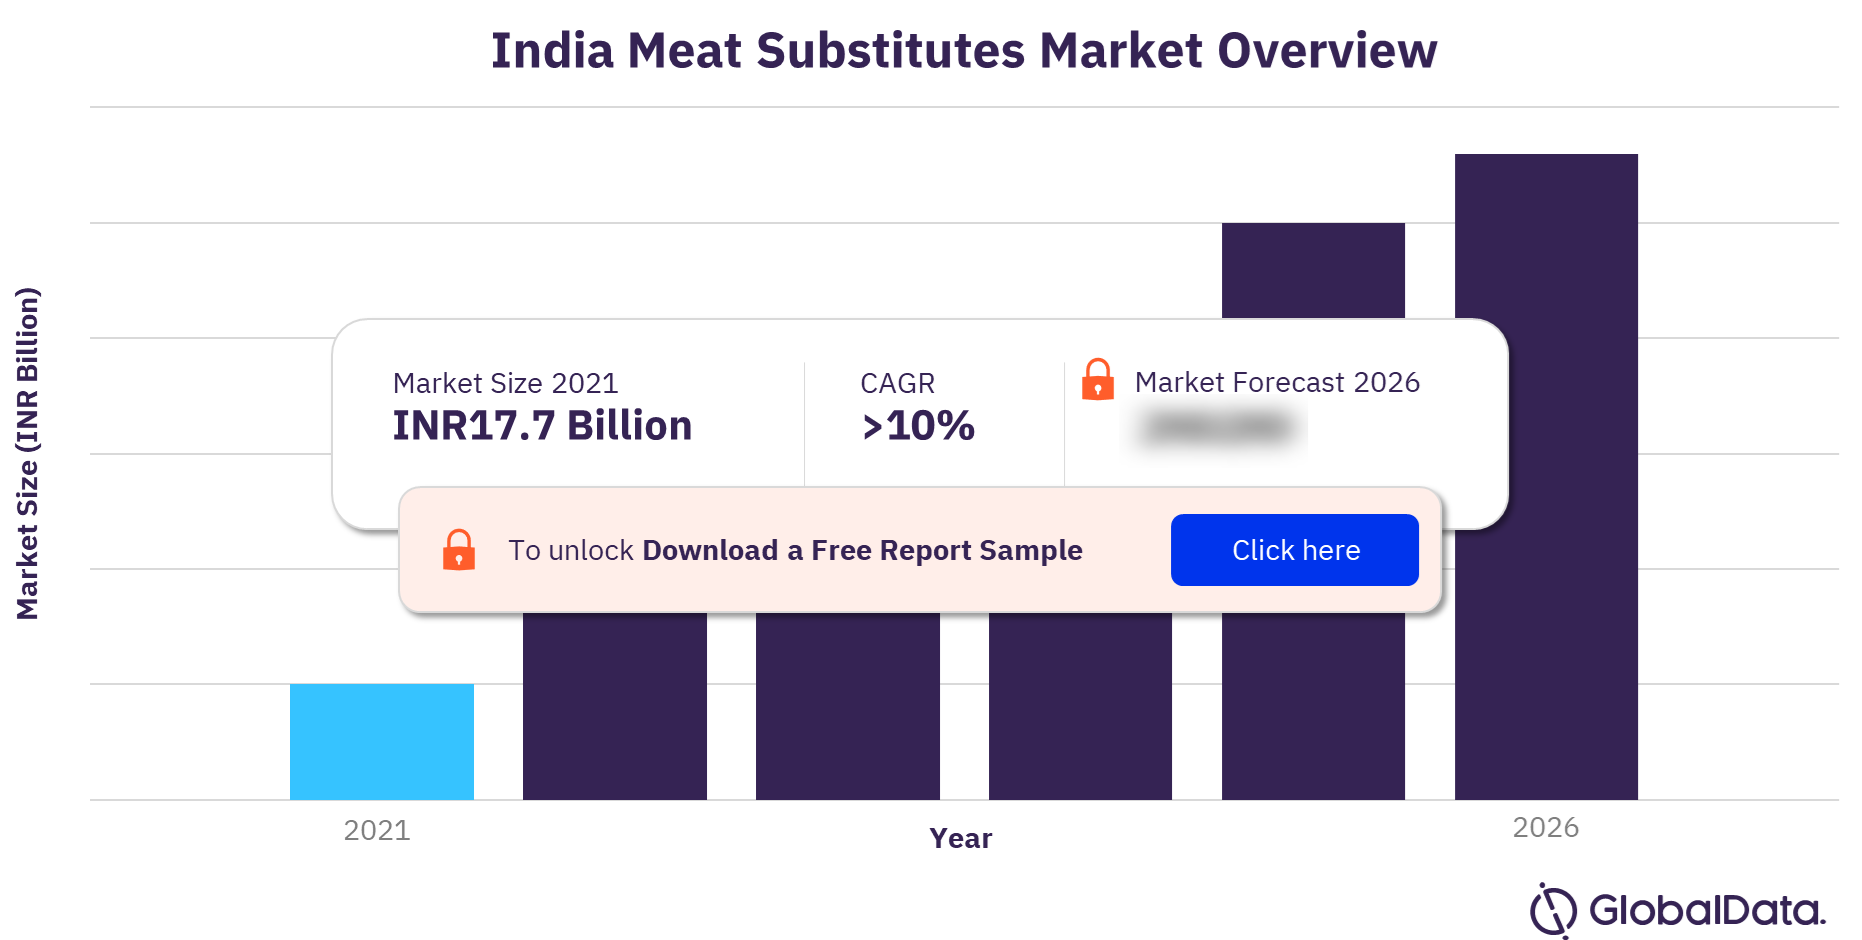 India Meat Substitutes Market Size 